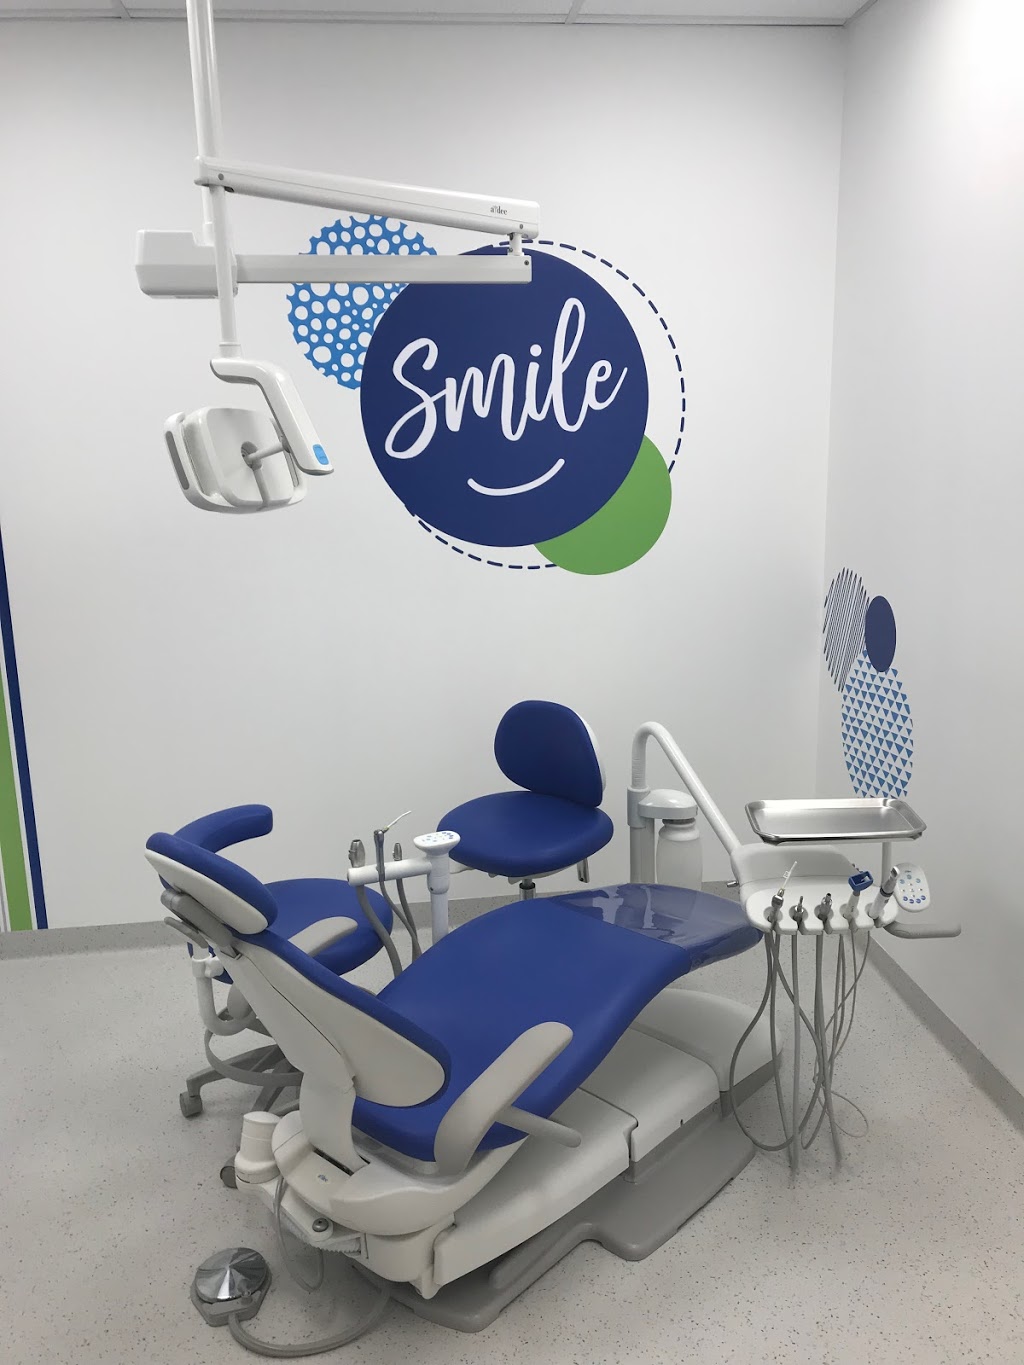 Pacific Smiles Dental, Figtree | dentist | Figtree Grove, 19 Princes Hwy, Figtree NSW 2525, Australia | 0242226500 OR +61 2 4222 6500